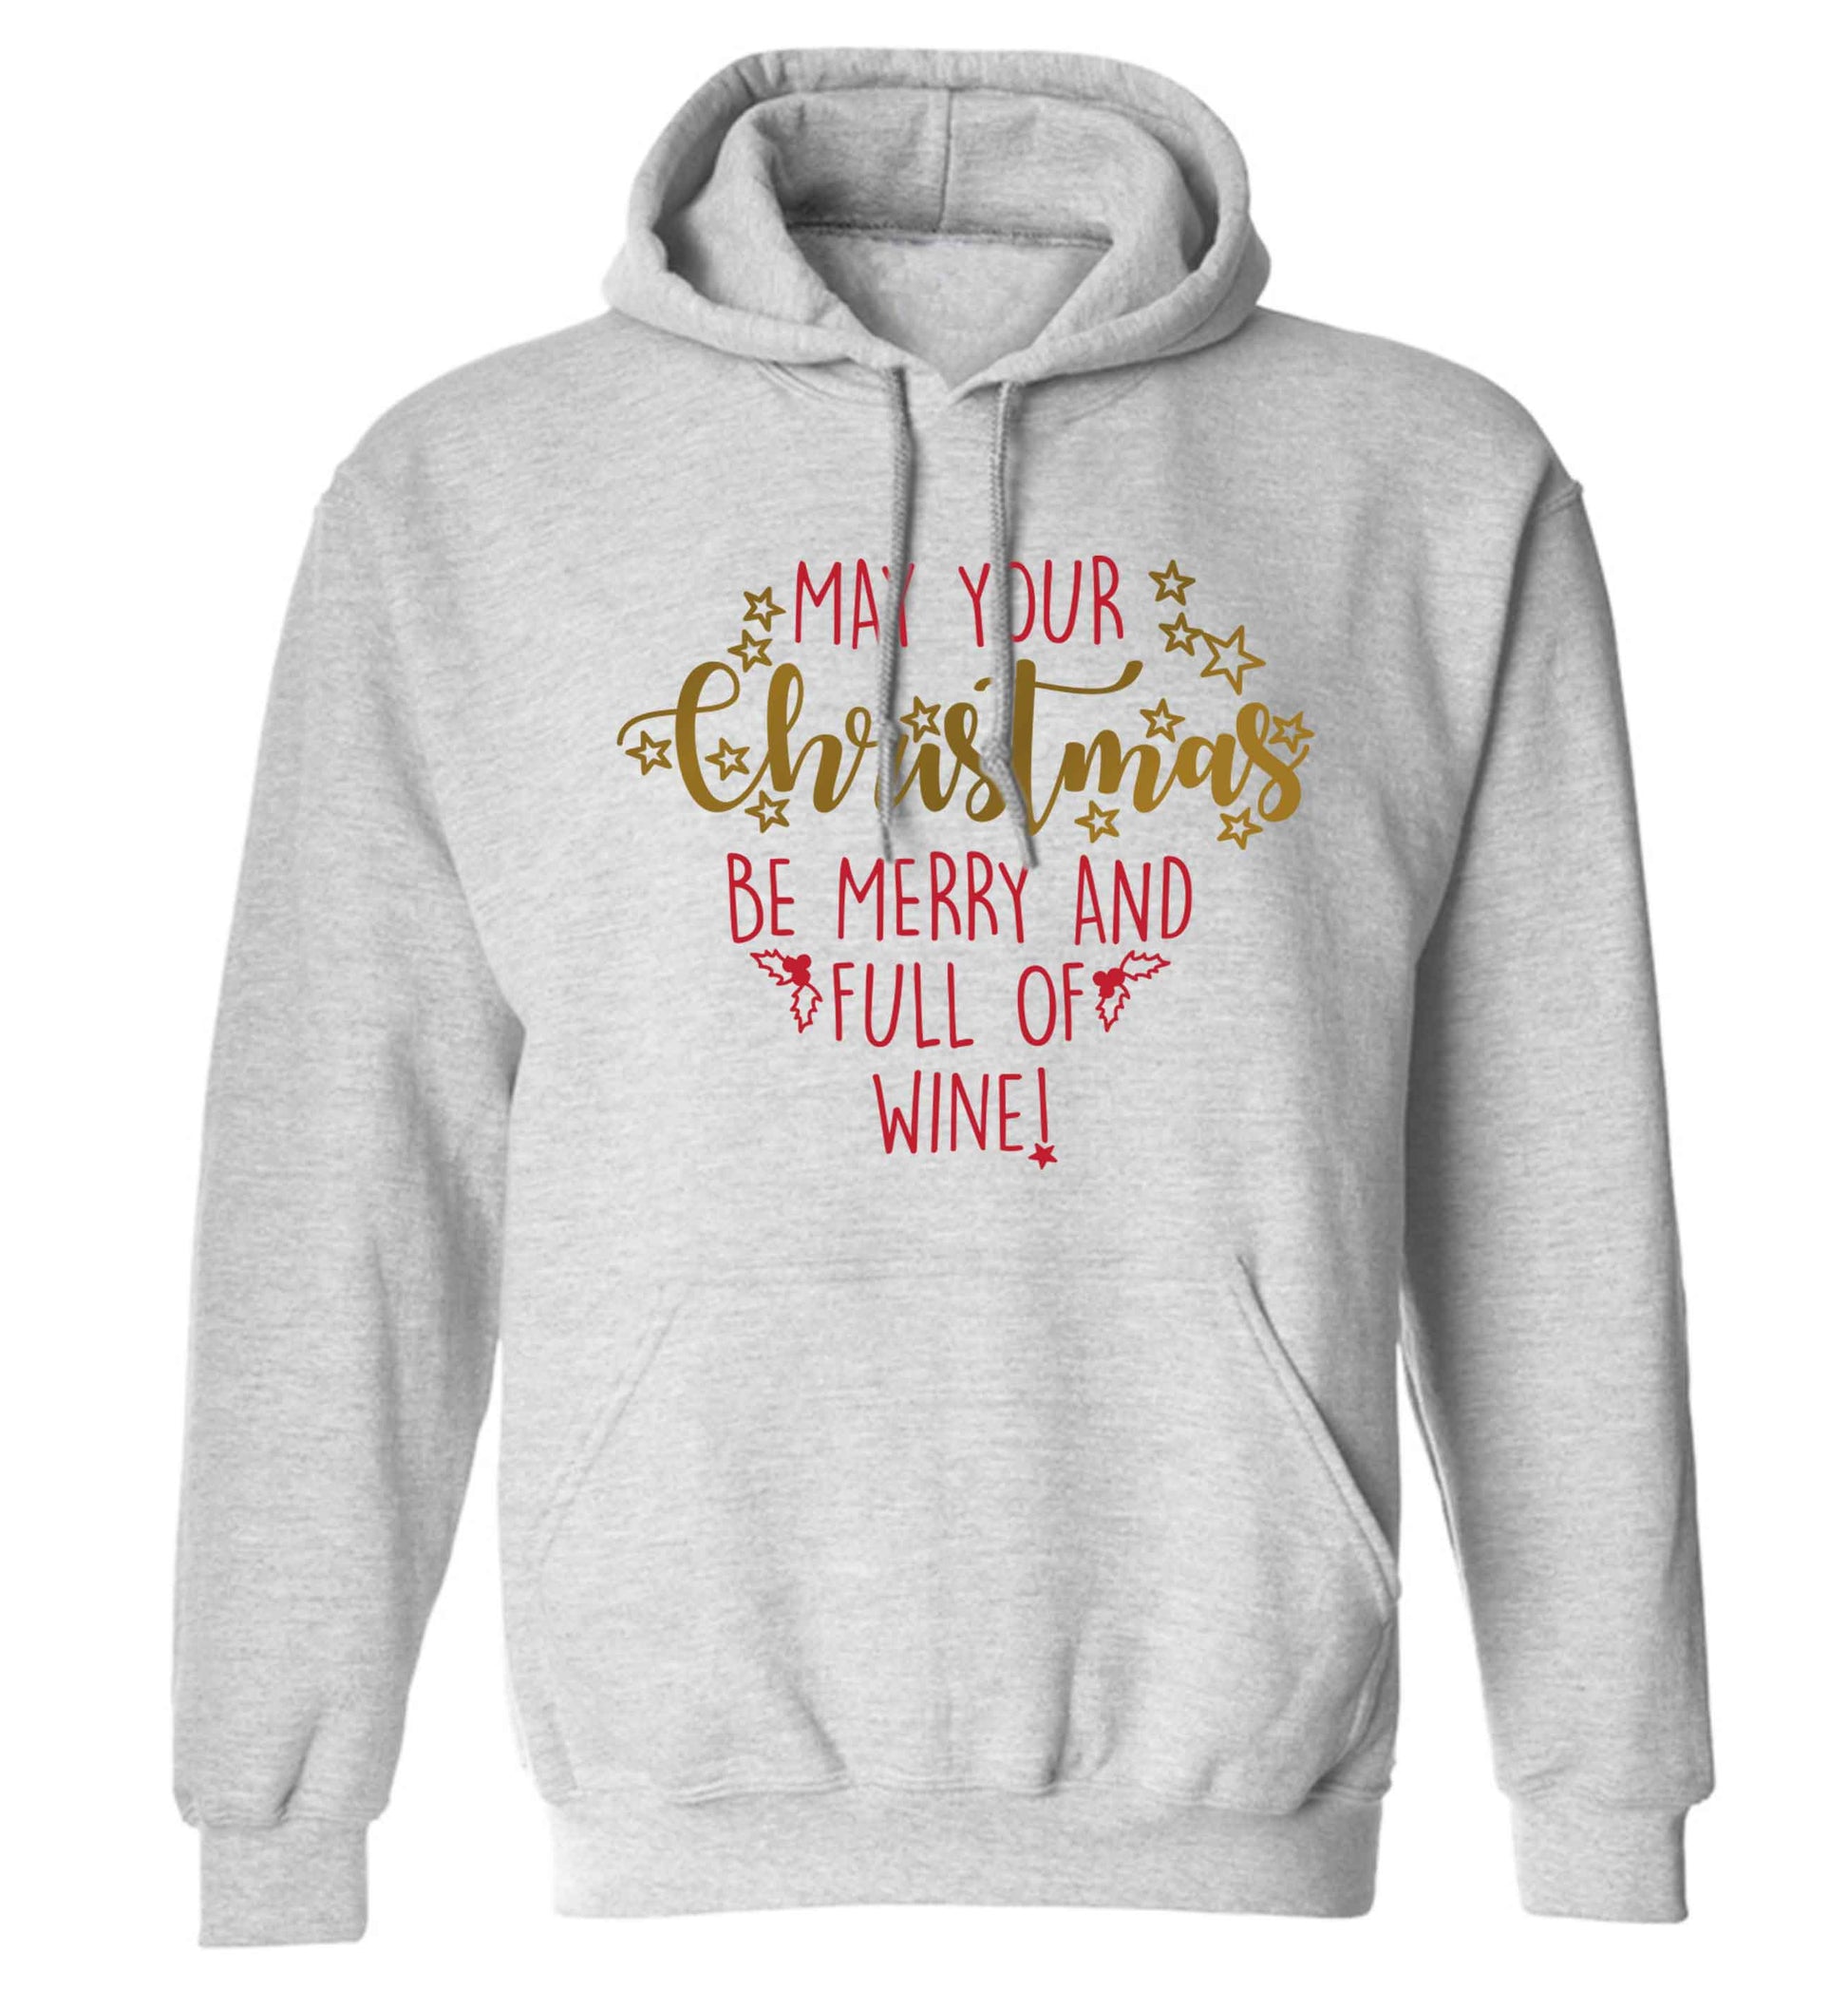 May your Christmas be merry and full of wine adults unisex grey hoodie 2XL